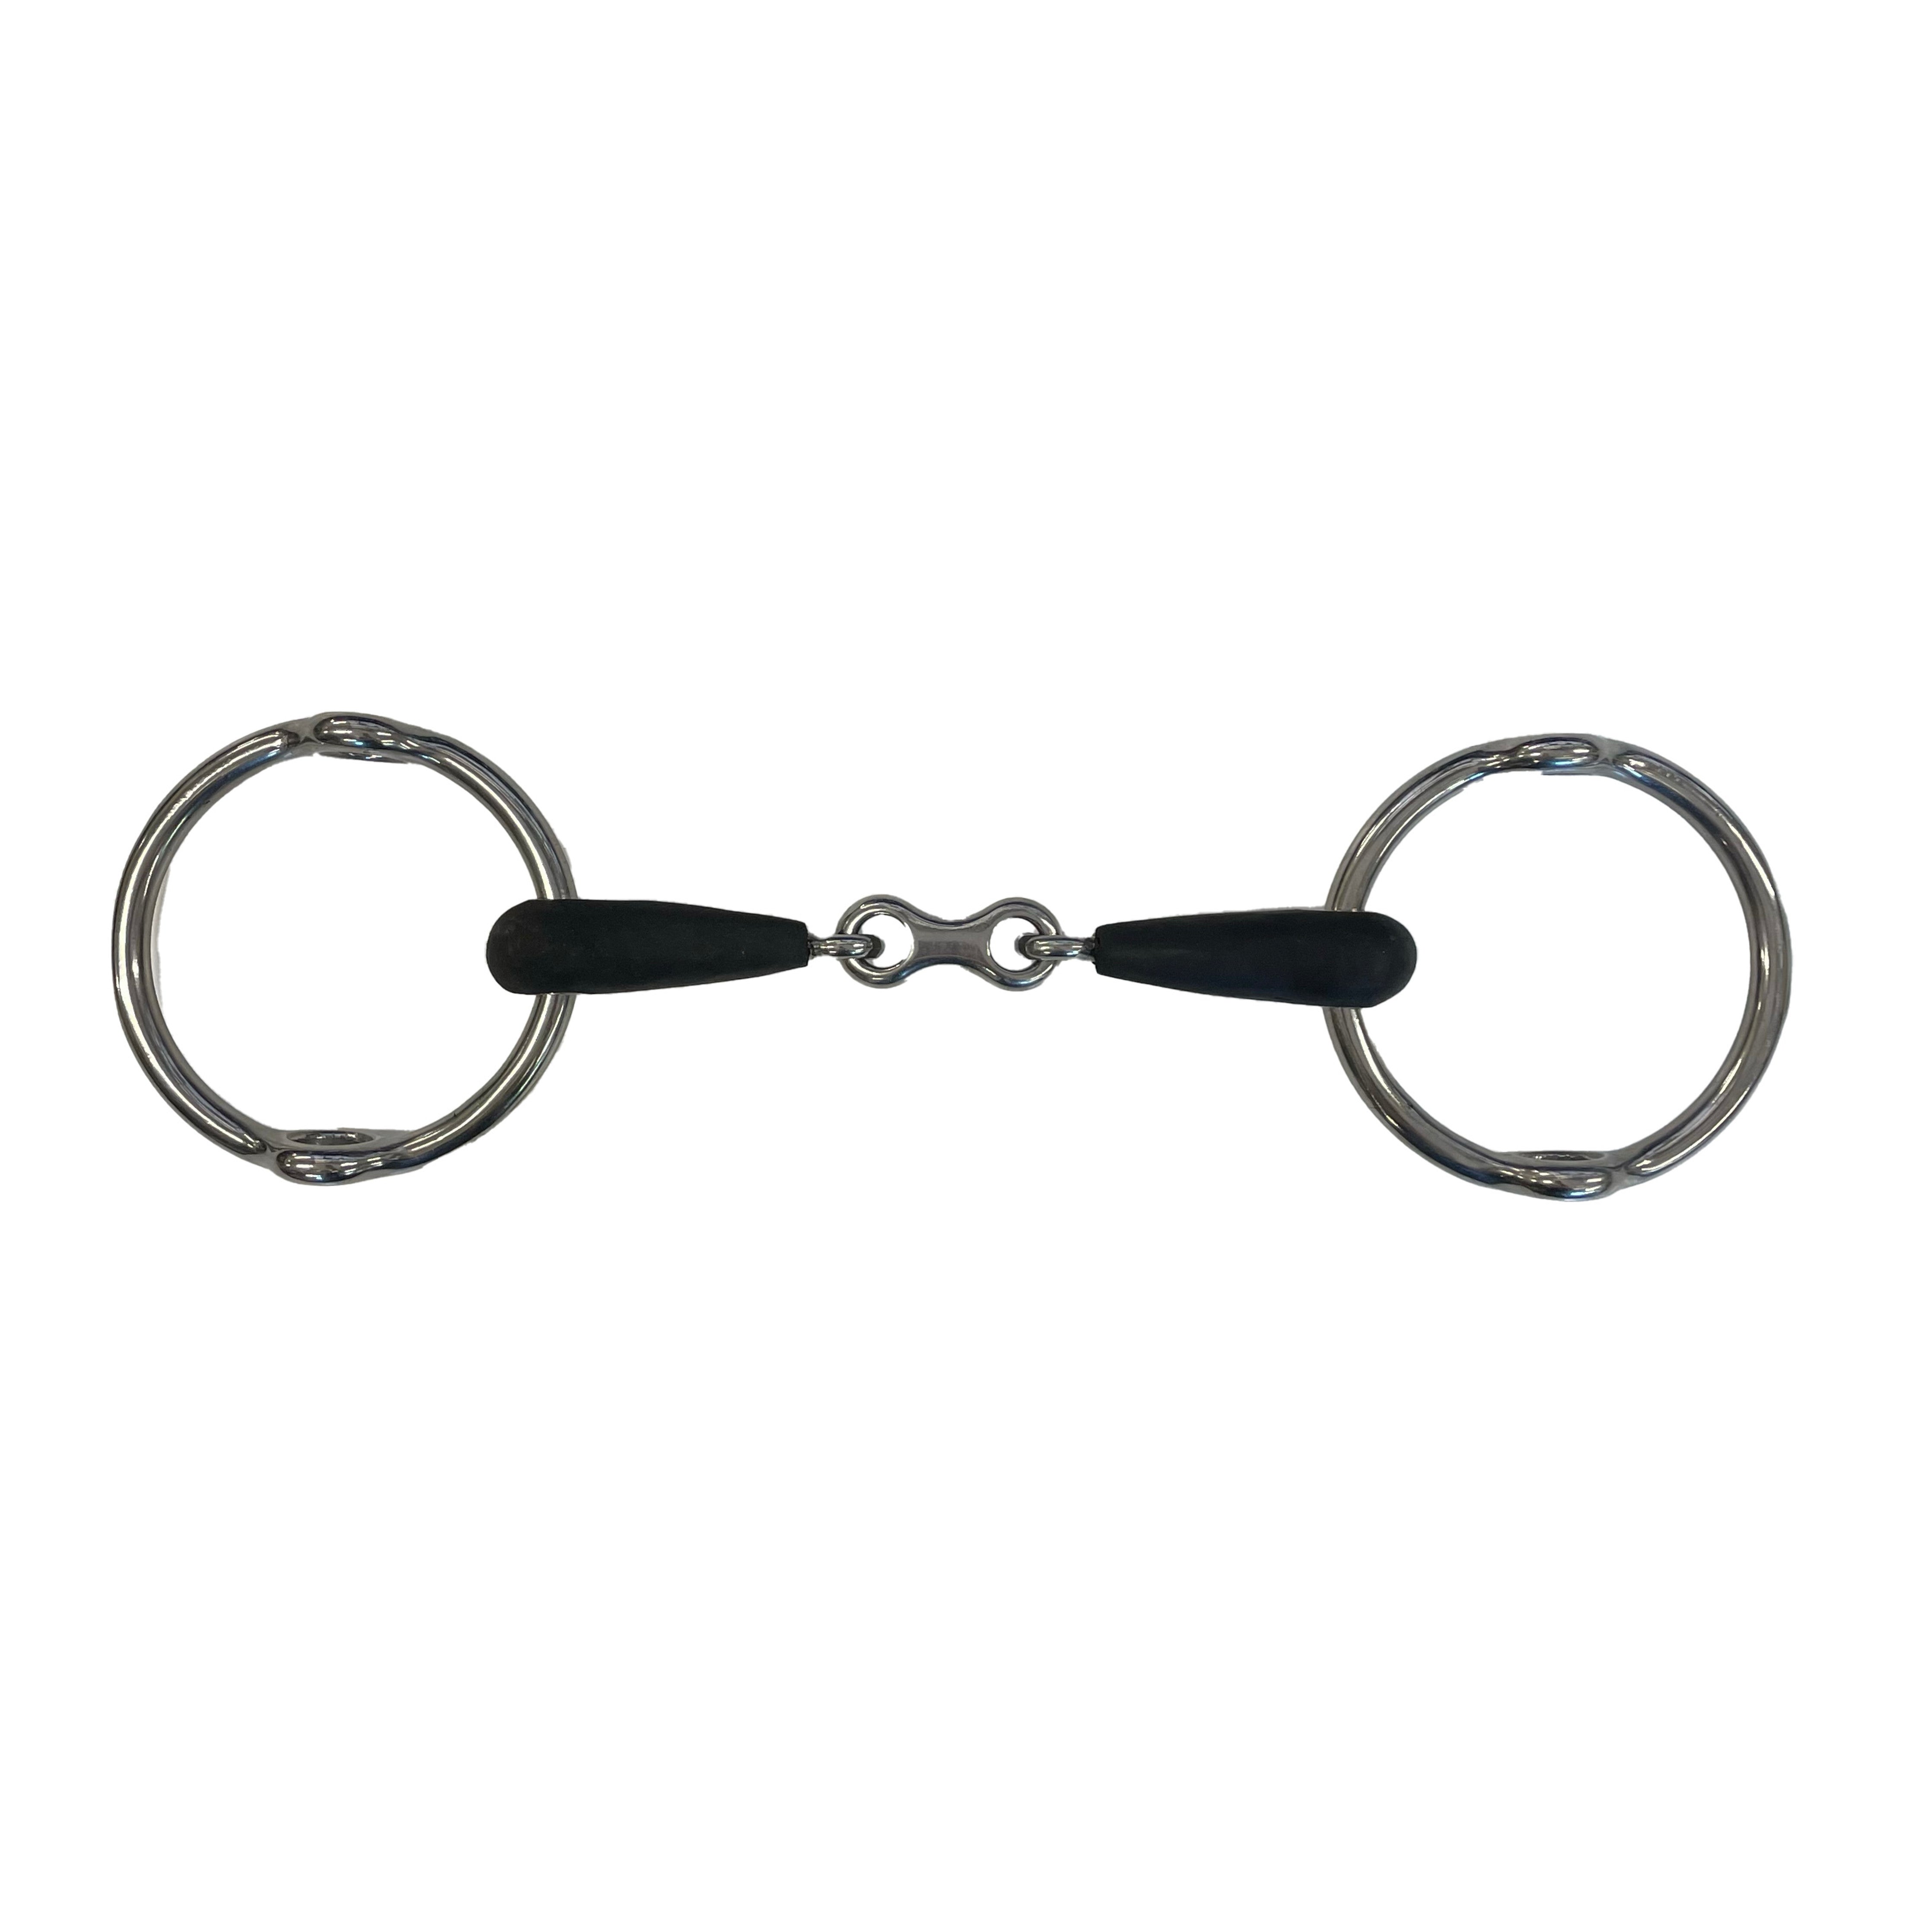 Abbey Bit Rubber Jointed French Gag 5.5